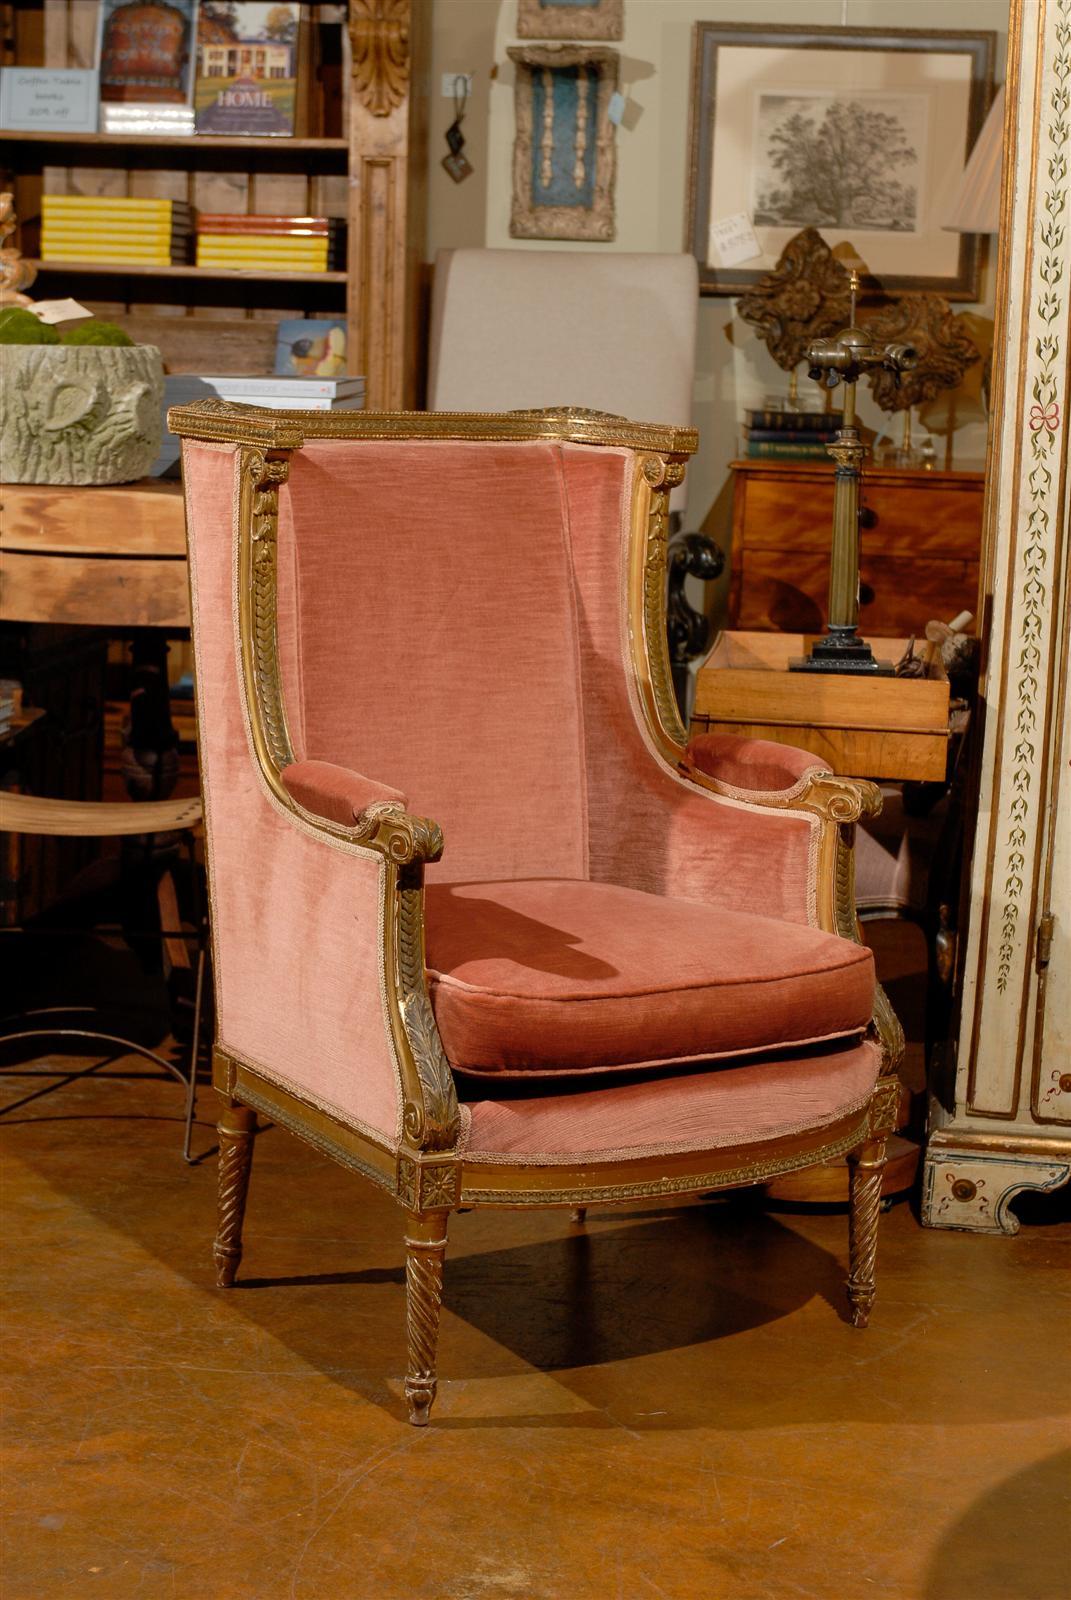 Early 19th century Italian full backed bergère, the rectangular back surmounting a square seat and raised on turned fluted legs, upholstered in a light pink velvet.